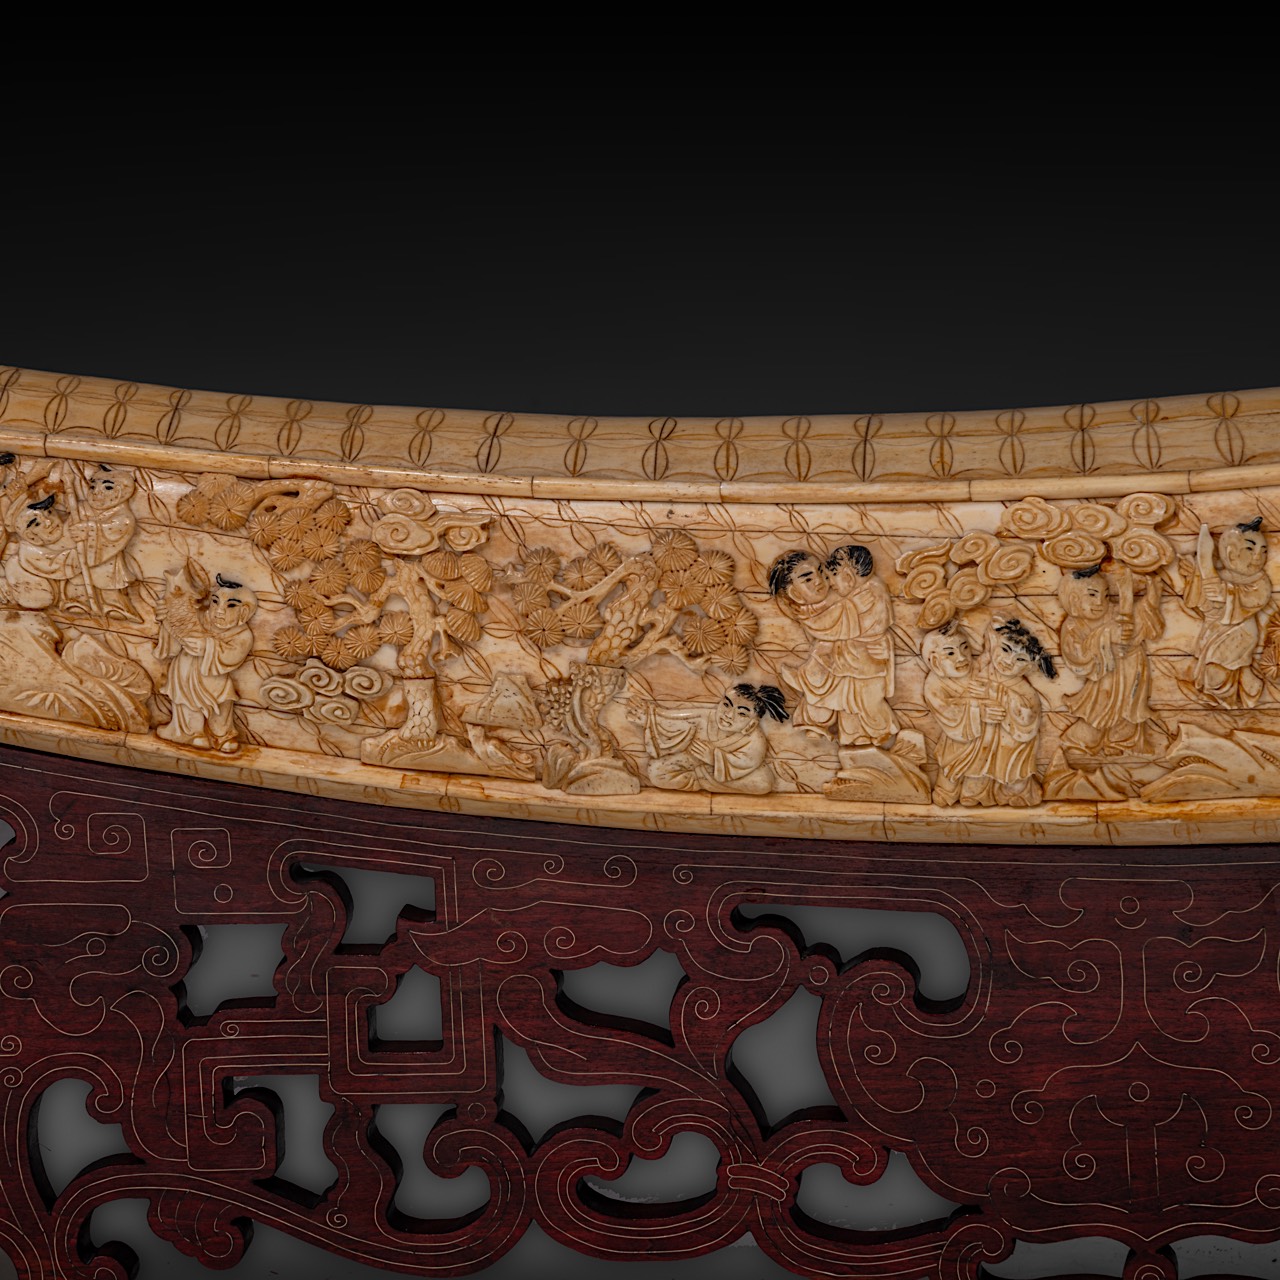 Tusk made from sculpted bone slats, Qing/Republic period, inner arch 165 cm - outer arch 175 cm - Image 12 of 13